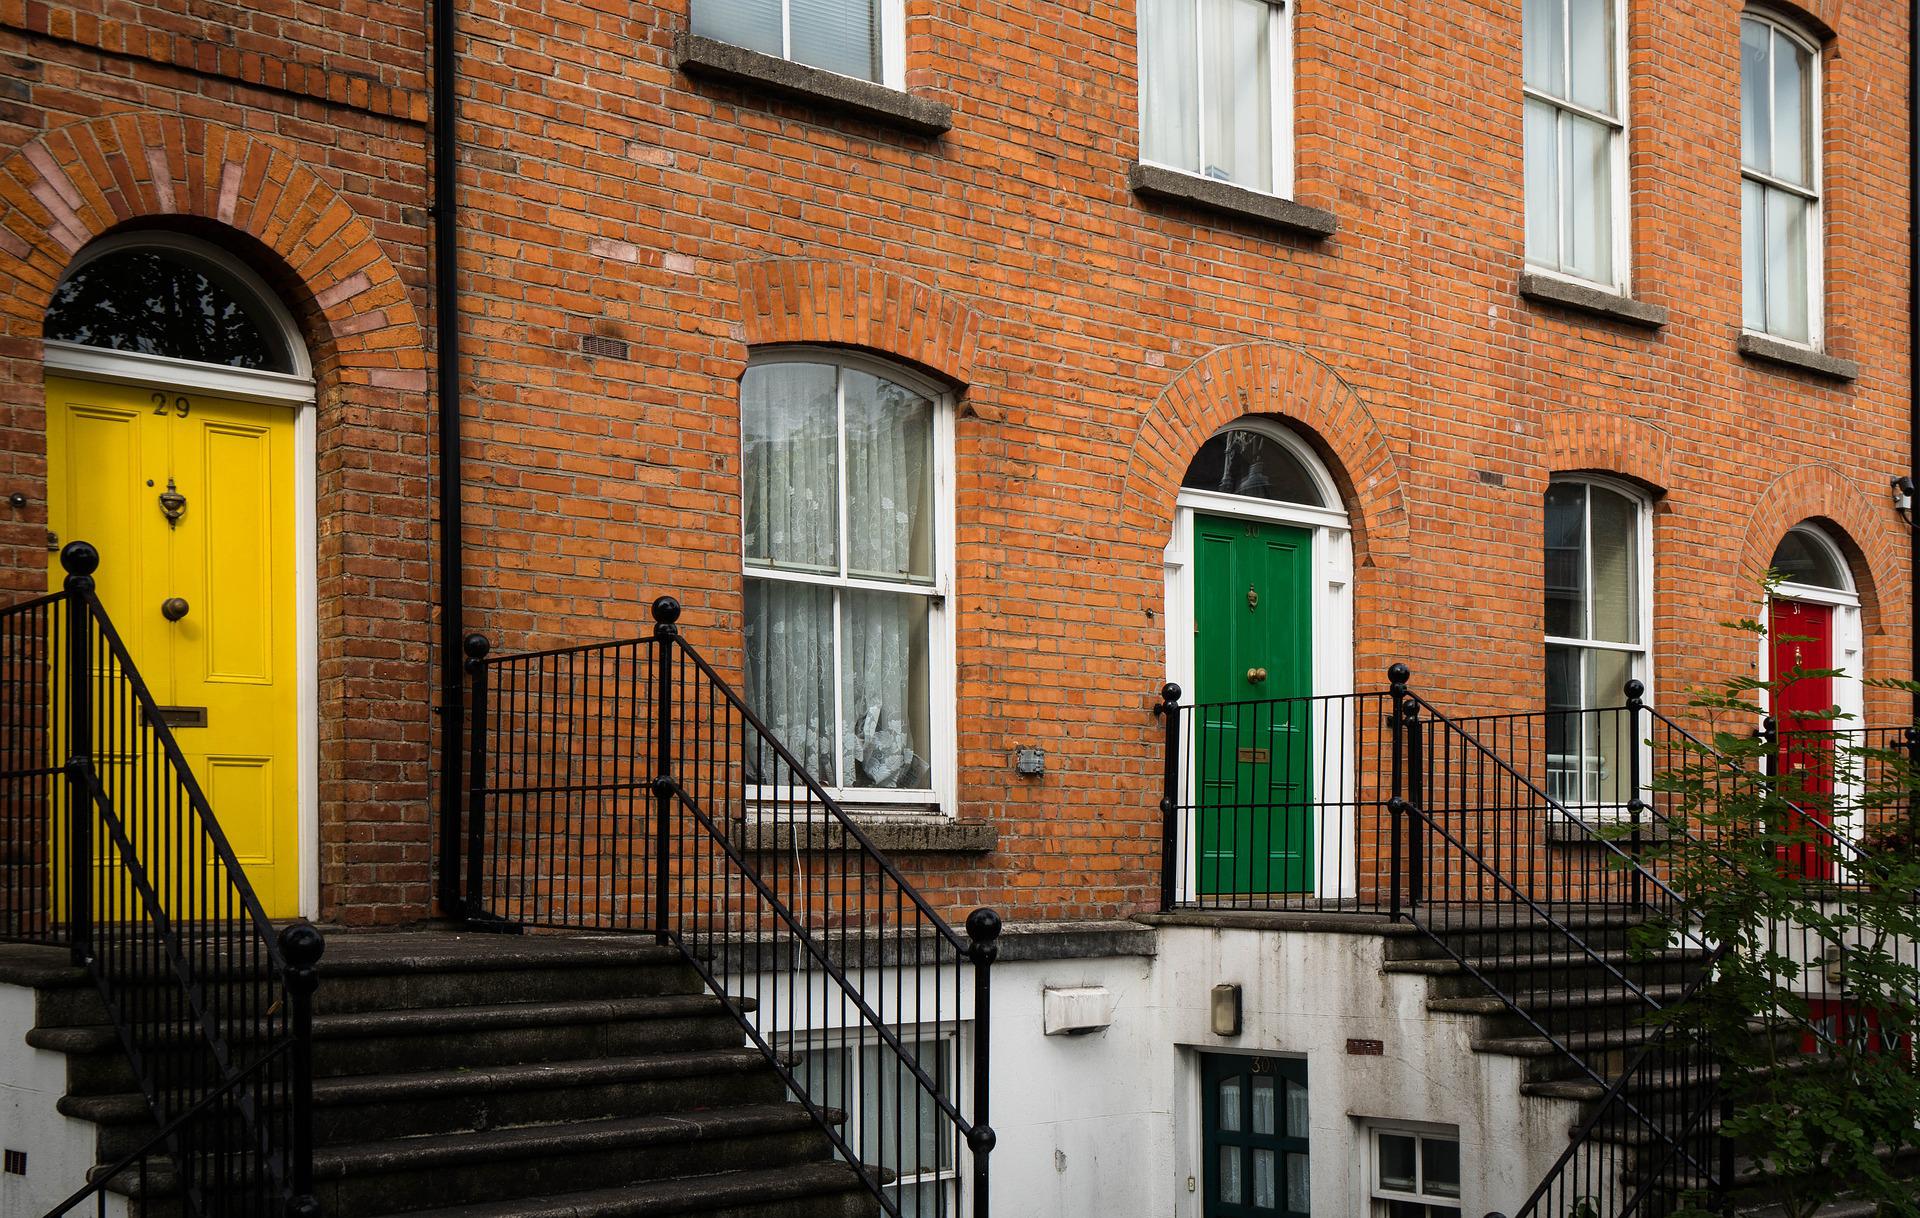 Find accommodation in Dublin